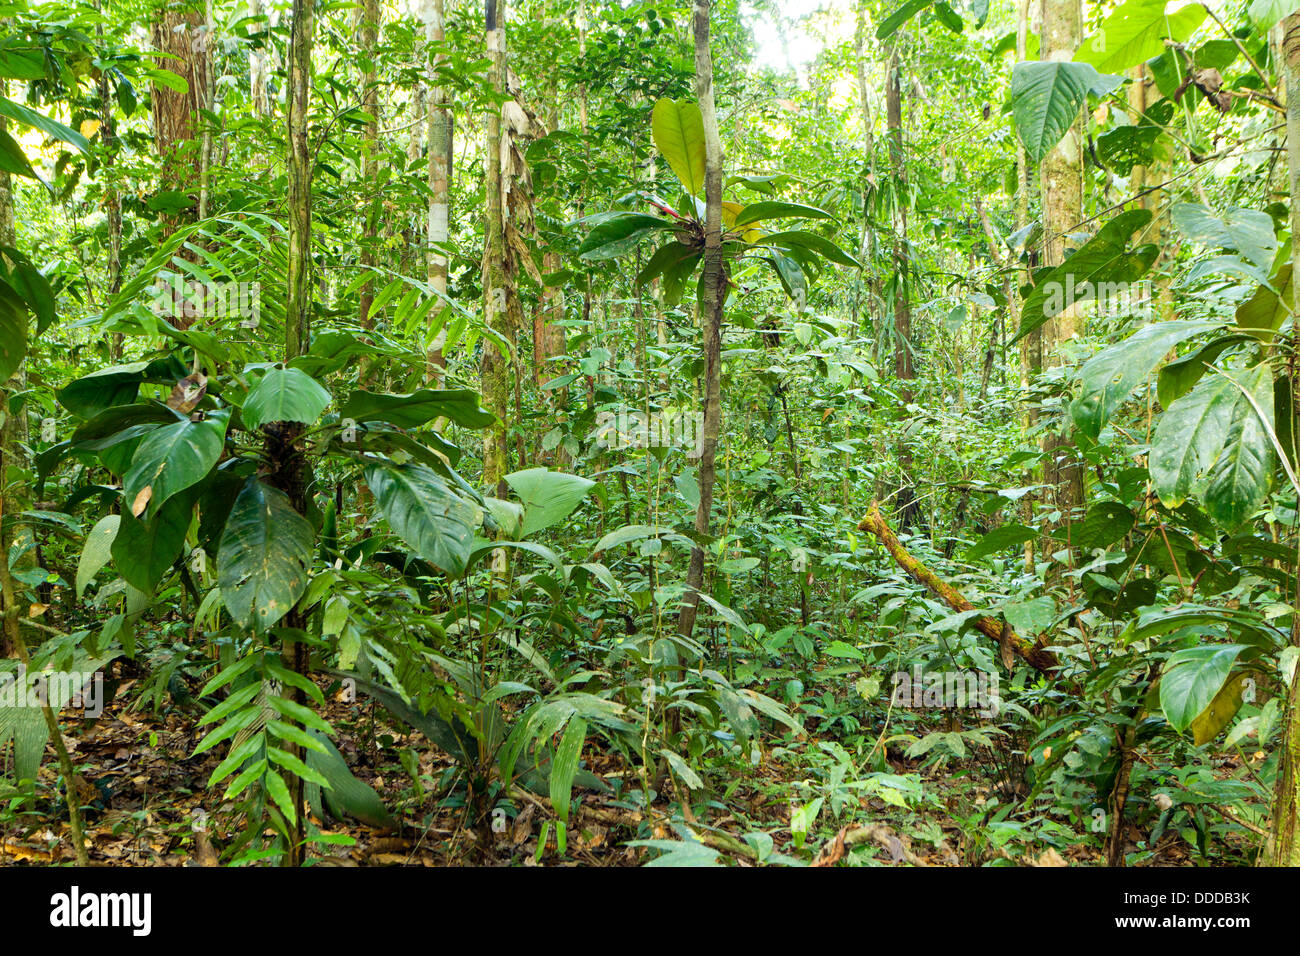 Interior of tropical rainforest with aroid climbers in foreground Stock Photo